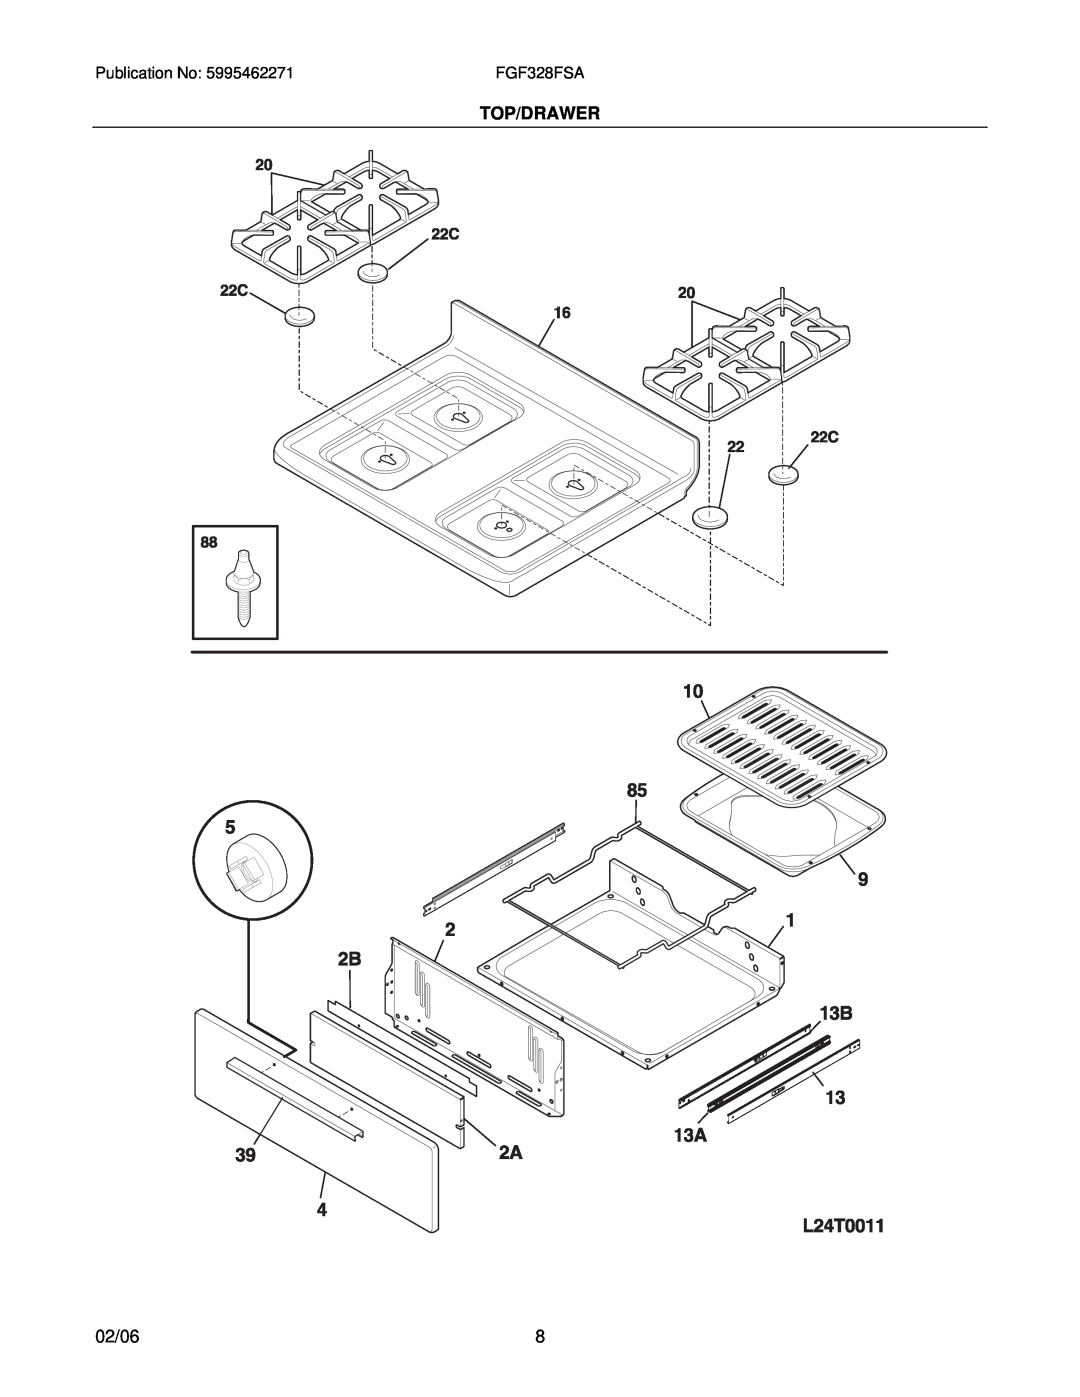 Frigidaire FGF328F installation instructions Top/Drawer, 02/06 